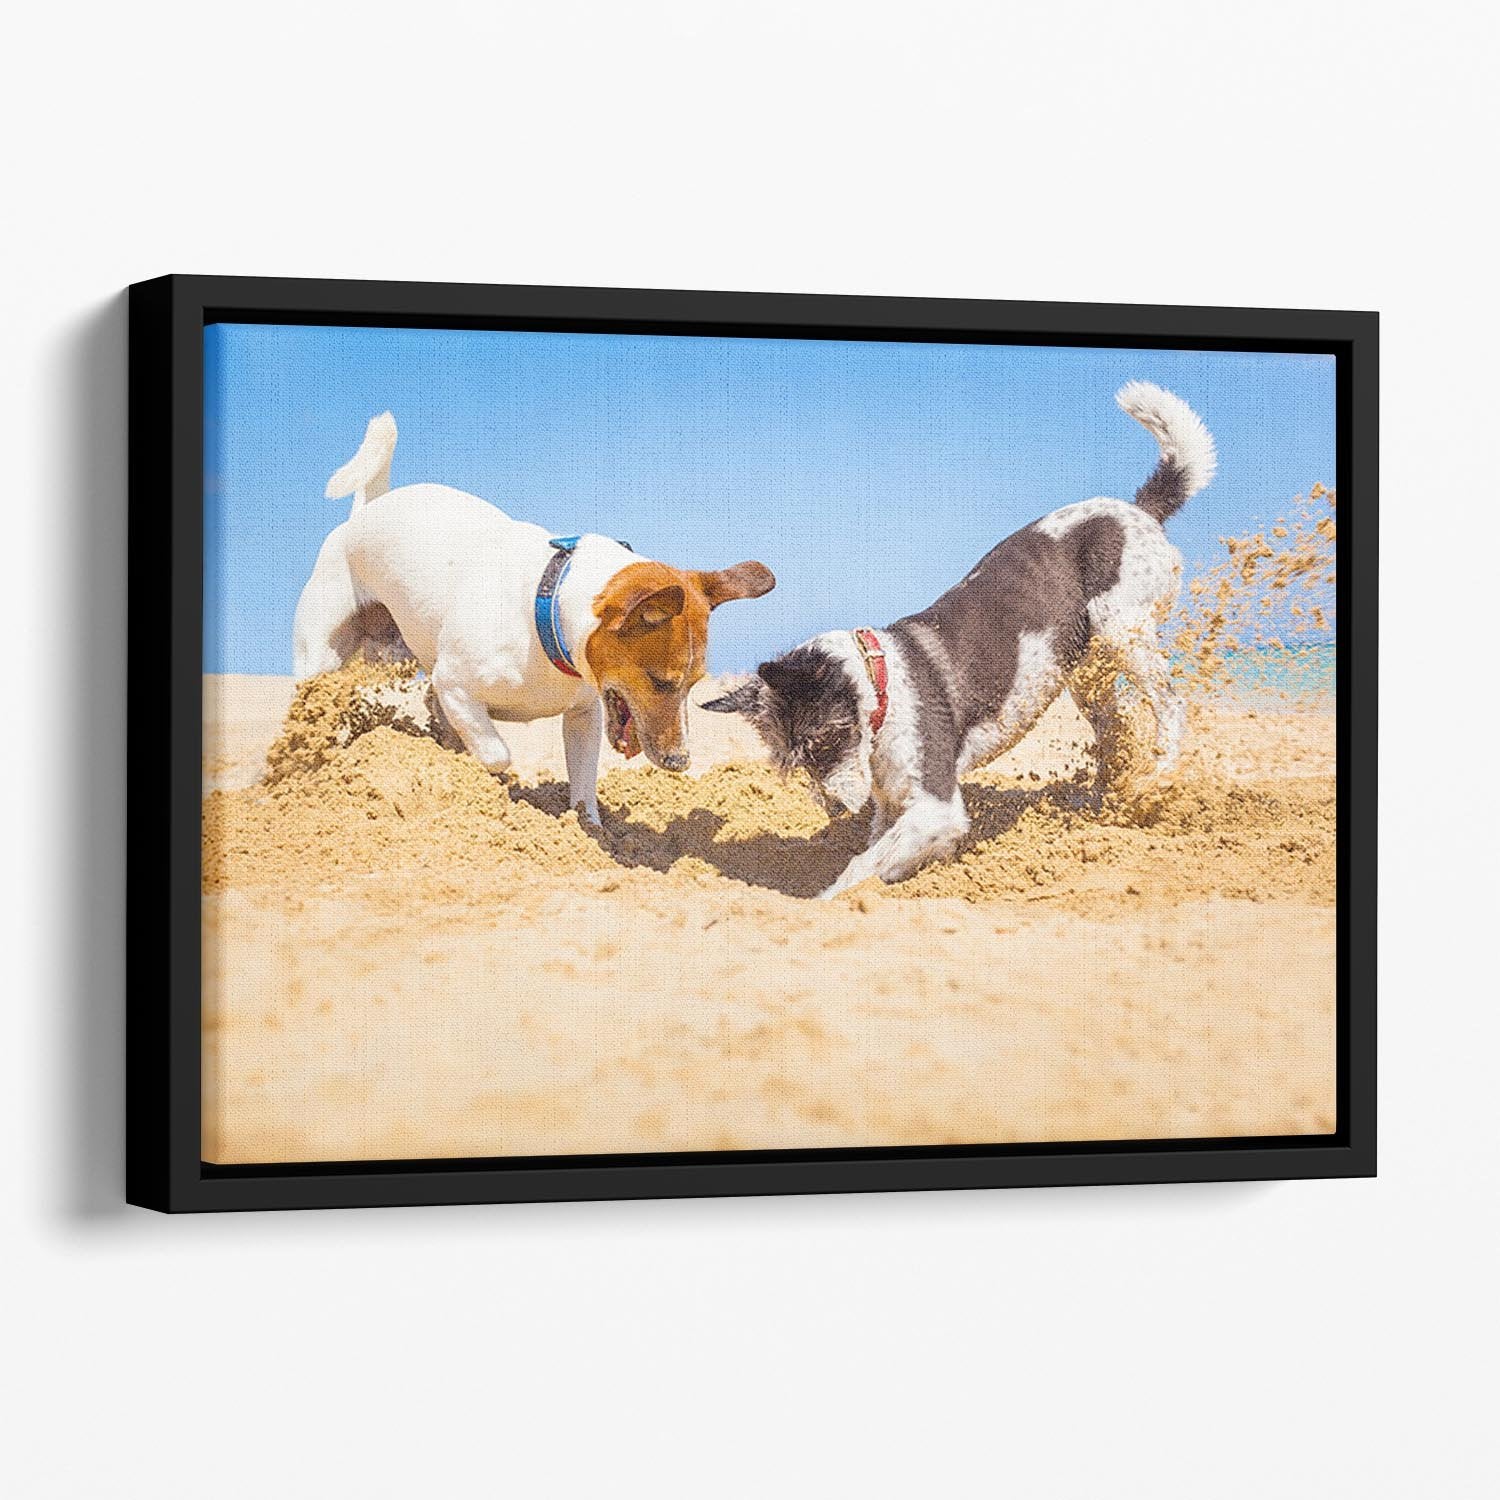 Jack russell couple of dogs digging a hole Floating Framed Canvas - Canvas Art Rocks - 1